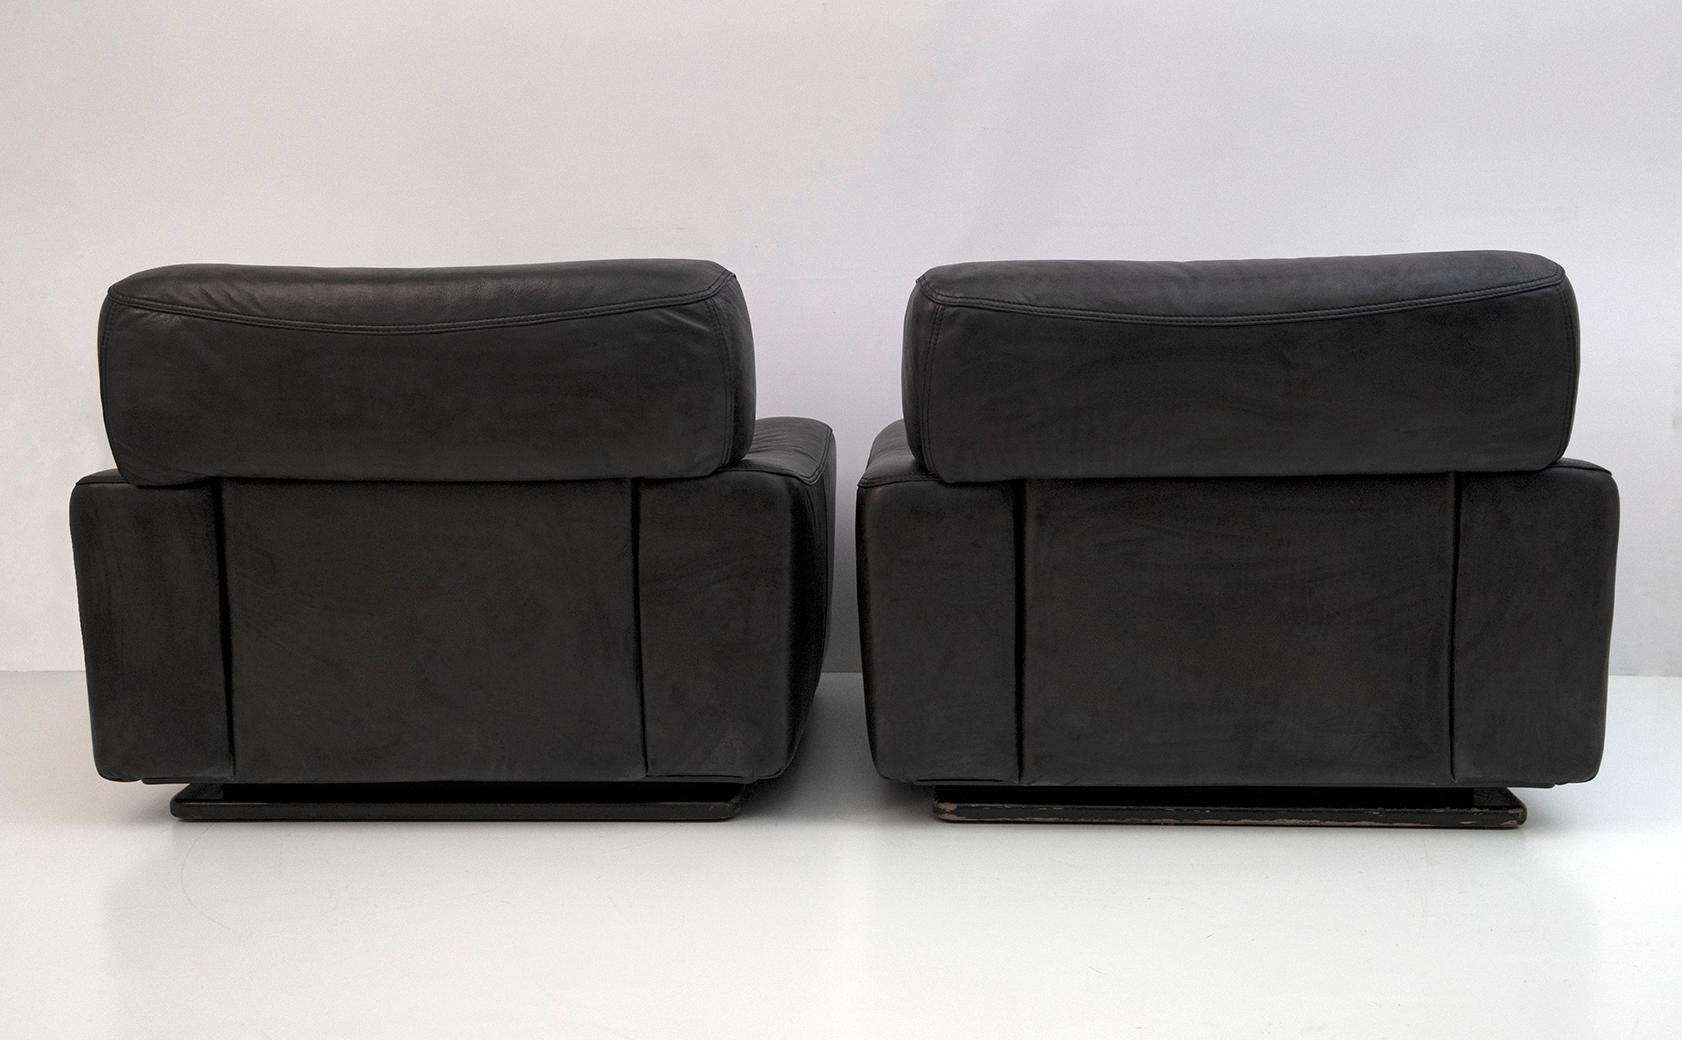 Pair of Busnelli Mid-Century Modern Italian Leather Armchairs, 1970s For Sale 2